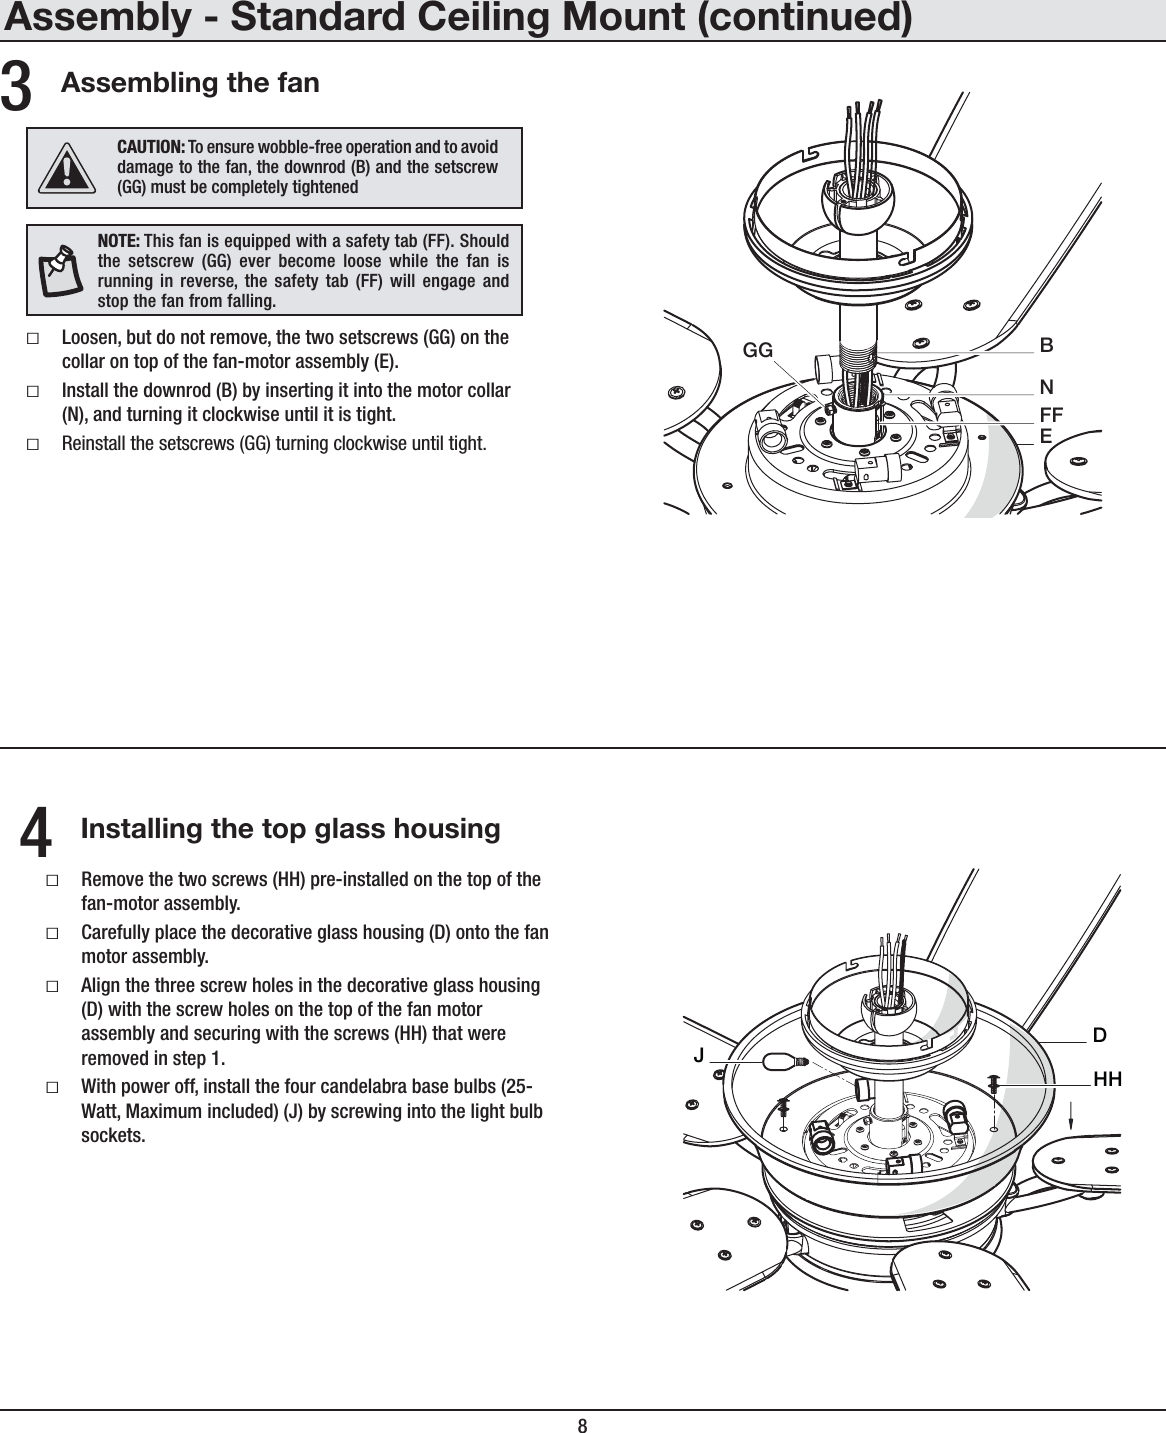 8Assembly - Standard Ceiling Mount (continued)Assembling the fanƑLoosen, but do not remove, the two setscrews (GG) on the collar on top of the fan-motor assembly (E).ƑInstall the downrod (B) by inserting it into the motor collar (N), and turning it clockwise until it is tight.ƑReinstall the setscrews (GG) turning clockwise until tight.3EGGFFBNInstalling the top glass housingƑRemove the two screws (HH) pre-installed on the top of the fan-motor assembly.ƑCarefully place the decorative glass housing (D) onto the fan motor assembly.ƑAlign the three screw holes in the decorative glass housing (D) with the screw holes on the top of the fan motor assembly and securing with the screws (HH) that were removed in step 1.ƑWith power off, install the four candelabra base bulbs (25-Watt, Maximum included) (J) by screwing into the light bulb sockets.4DHHJNOTE: This fan is equipped with a safety tab (FF). Should the setscrew (GG) ever become loose while the fan is running in reverse, the safety tab (FF) will engage and stop the fan from falling.CAUTION: To ensure wobble-free operation and to avoid damage to the fan, the downrod (B) and the setscrew (GG) must be completely tightened